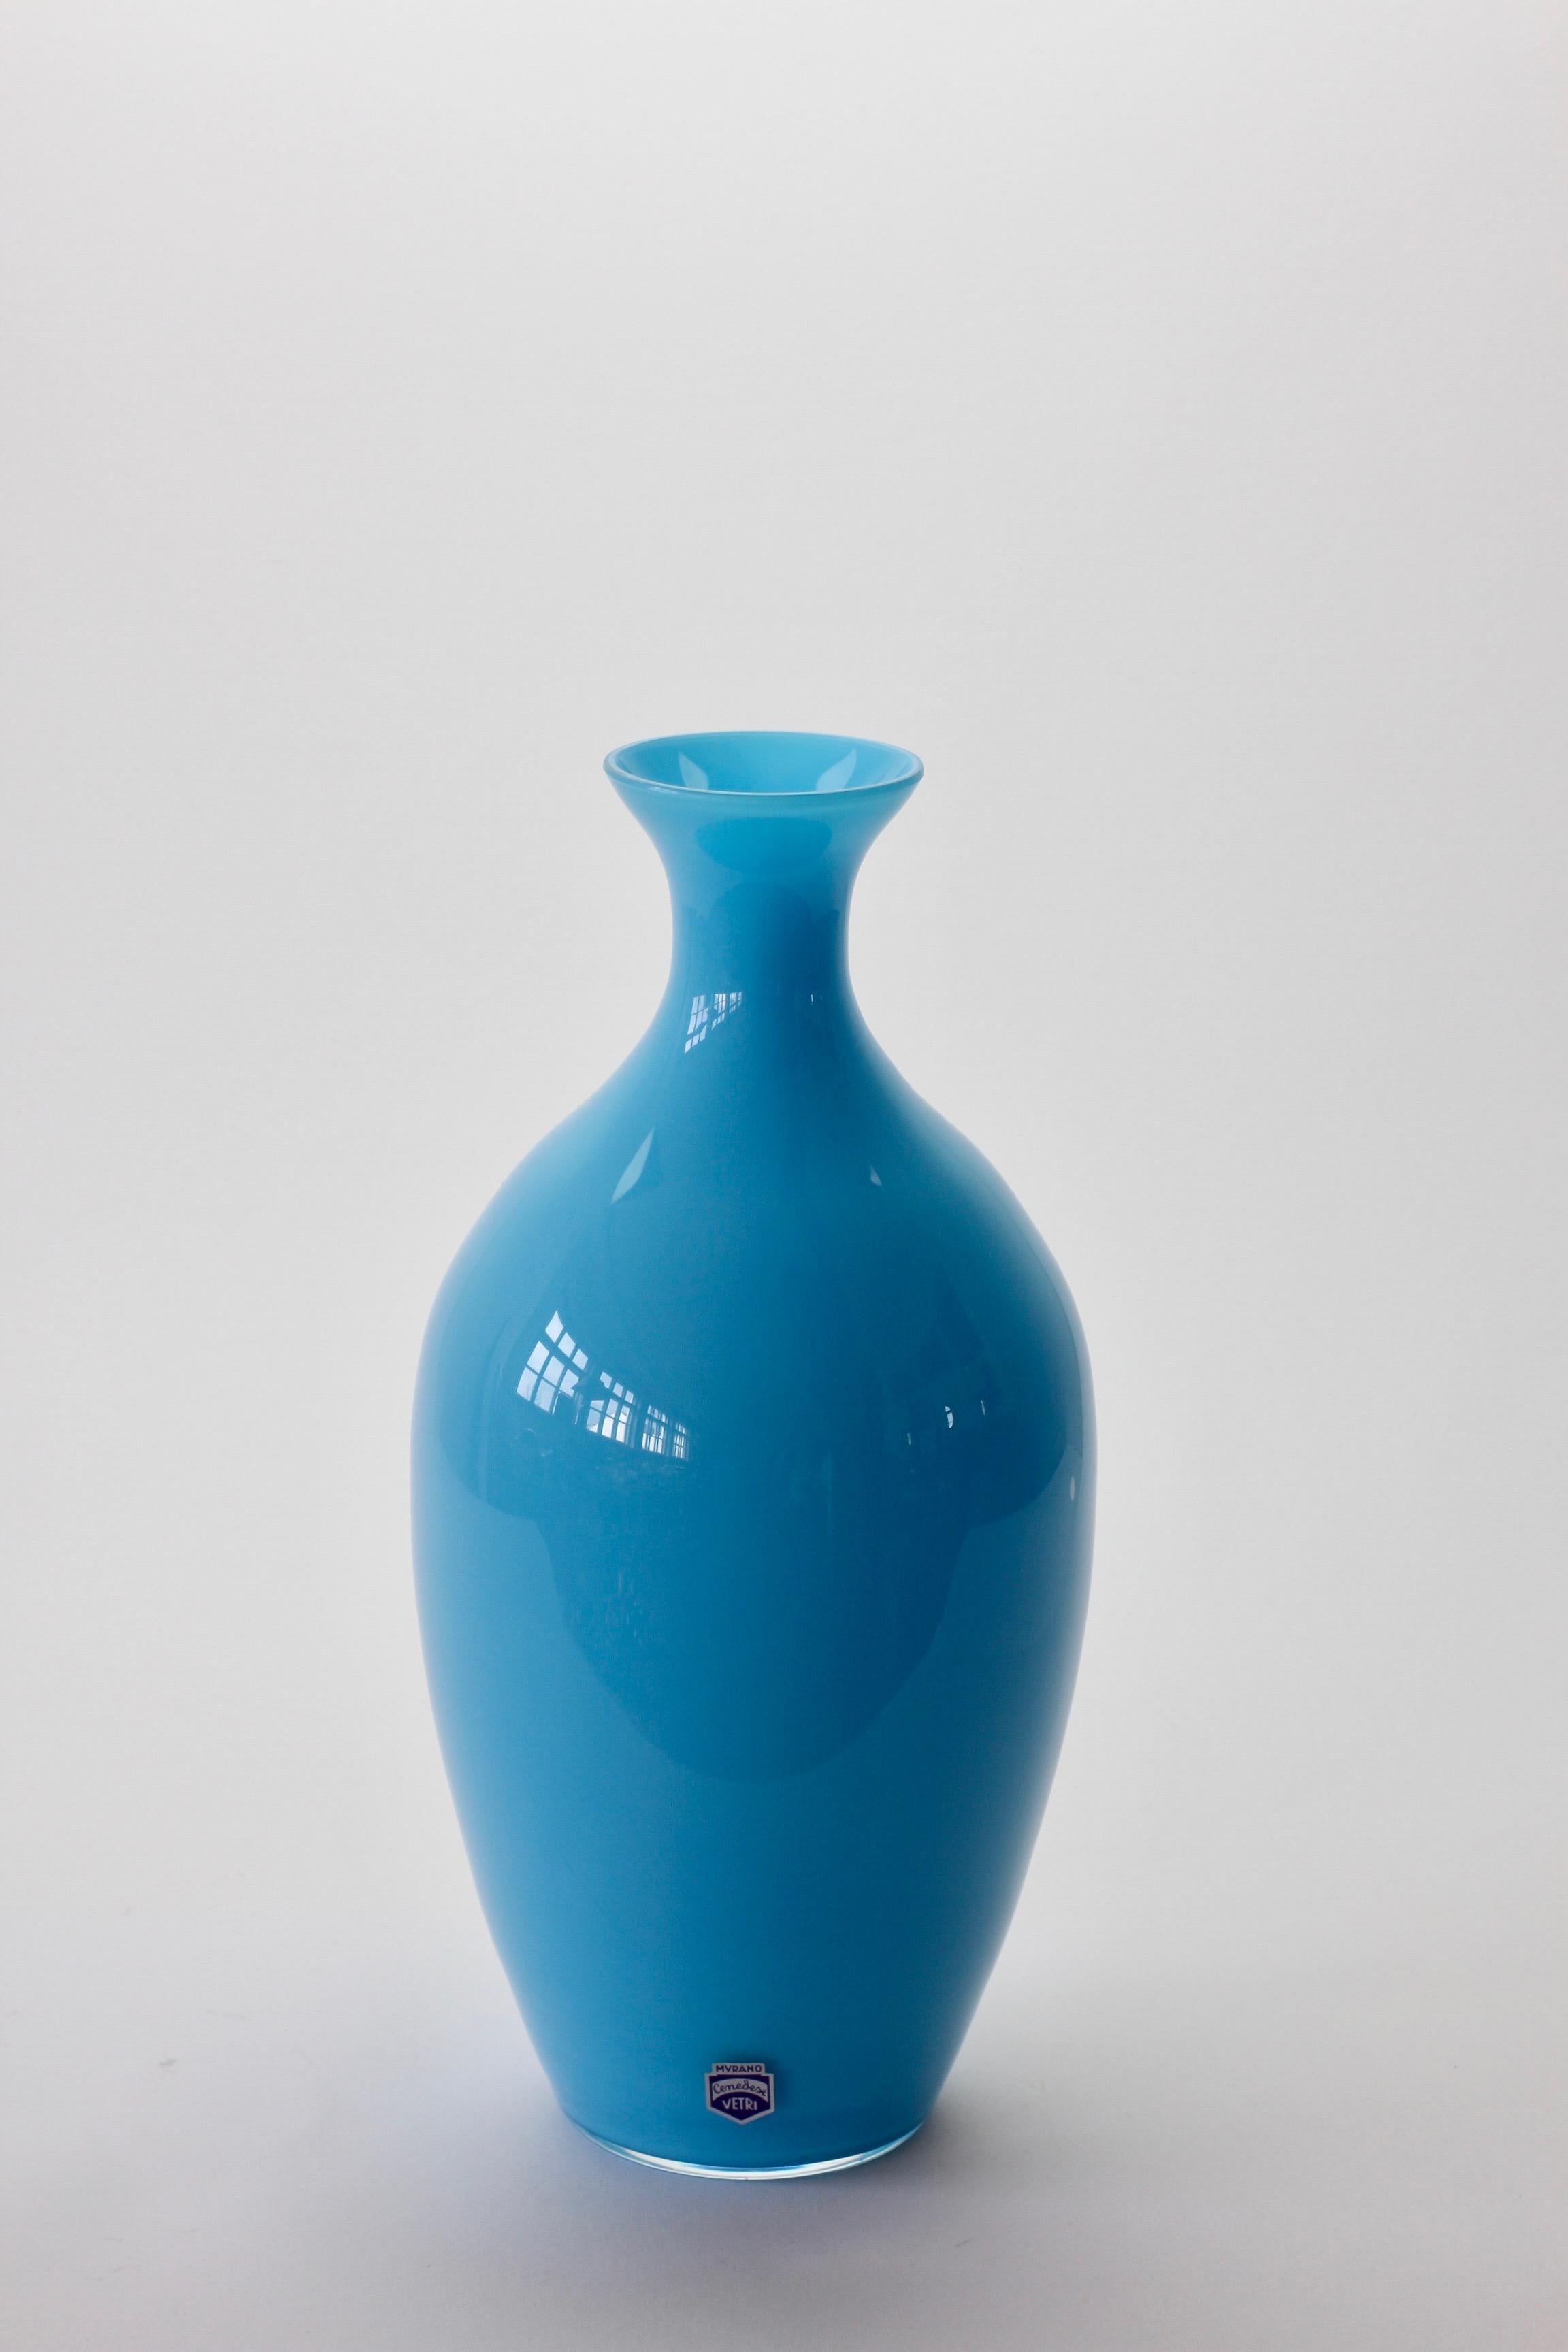 Wonderful light blue vase by Cenedese Vetri of Murano, Italy. A fun, funky and bright way to add a touch of bold color / color to your interior - imagine glass like this on open, white shelving in a kitchen, bathroom or in a display cabinet.

  